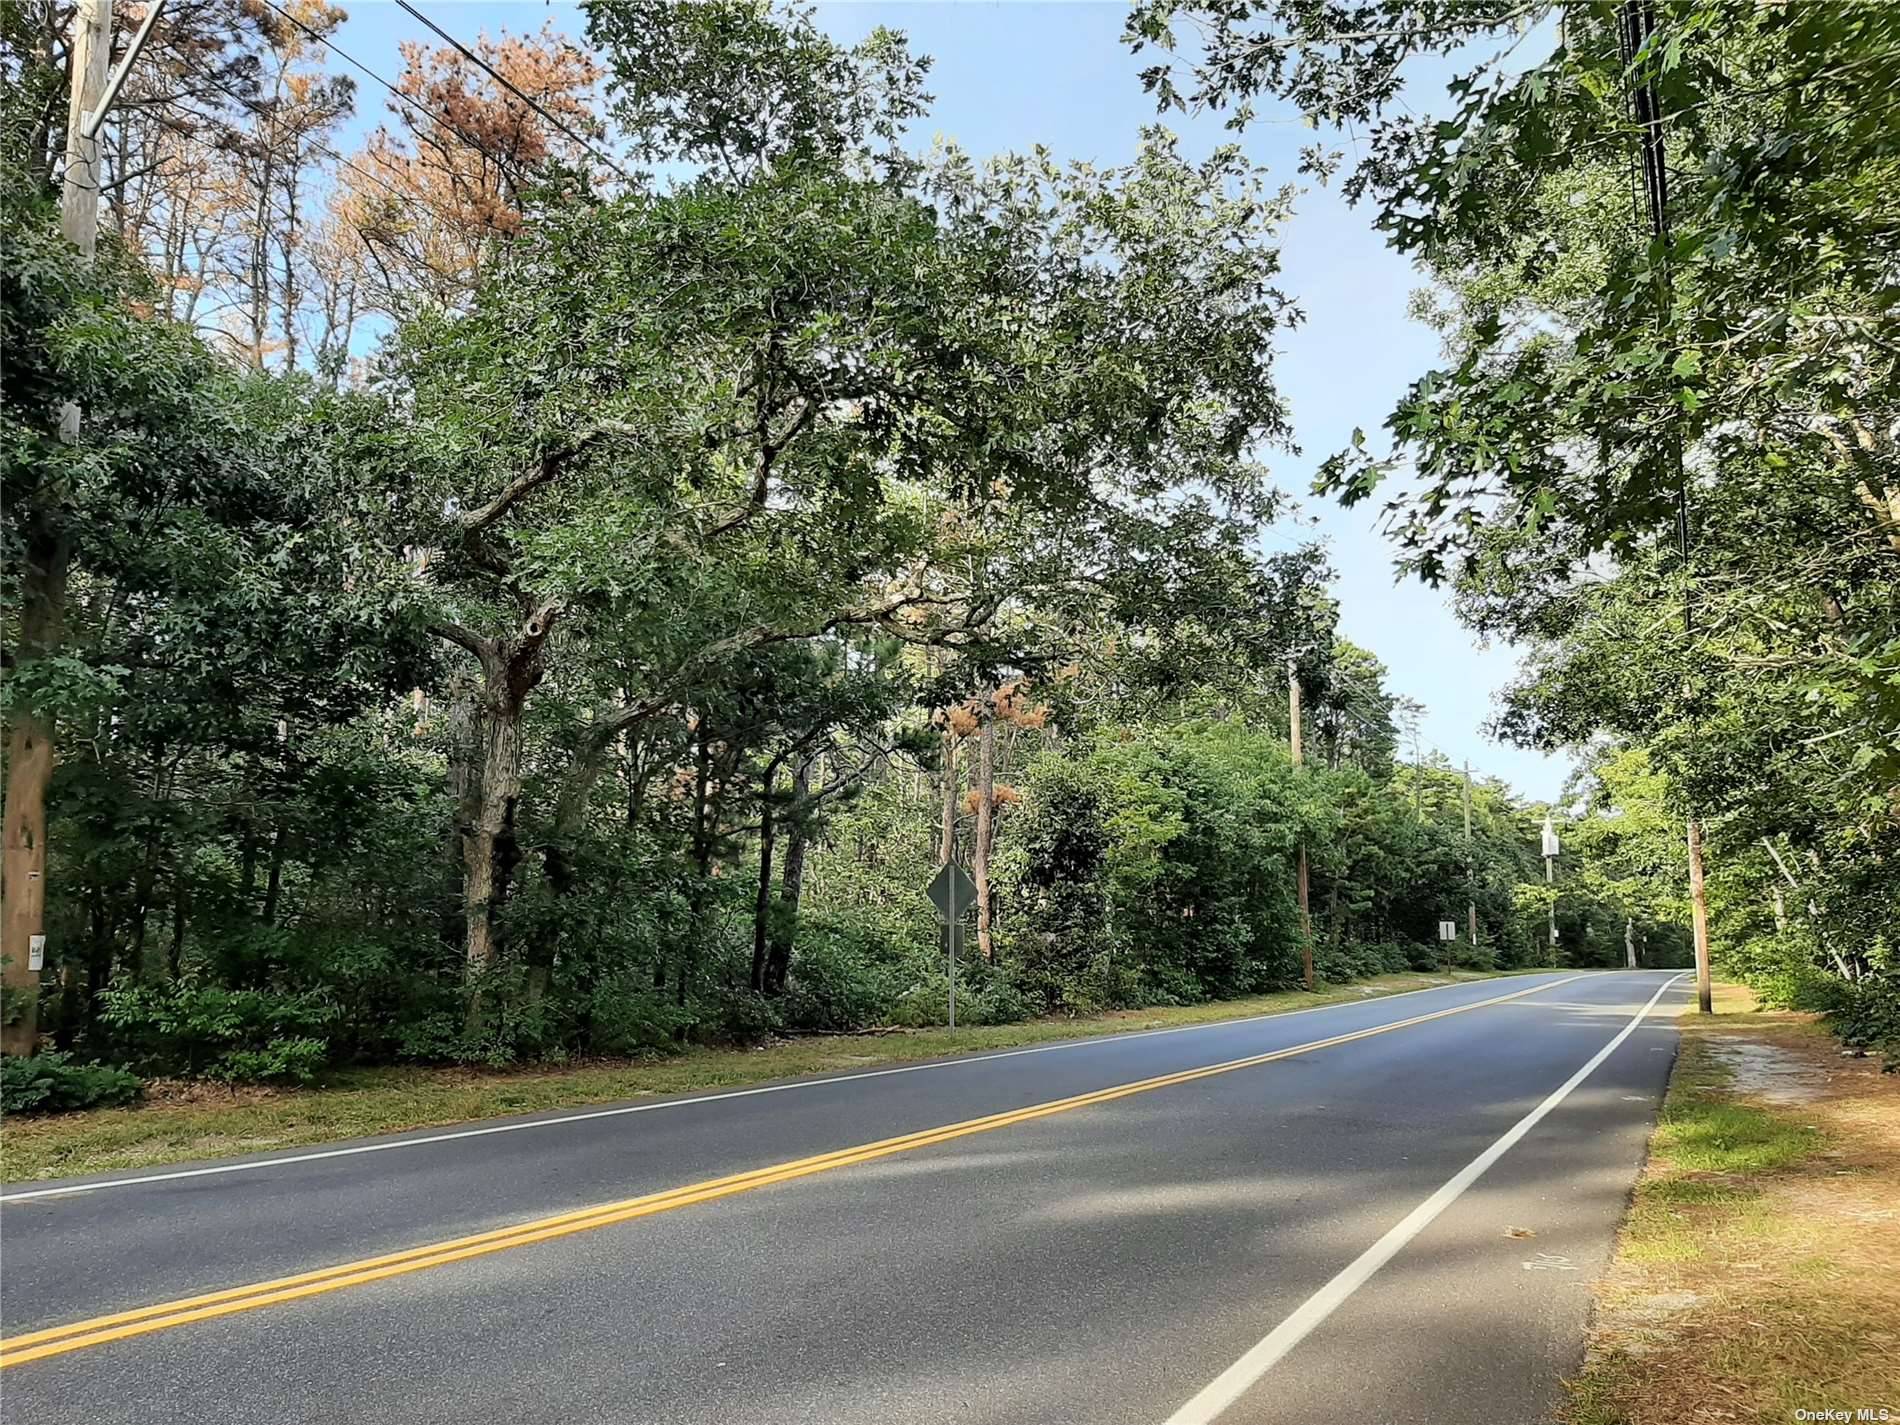 3. 8 Acres located in the quiet picturesque Hamlet of East Quogue, Southampton Town.